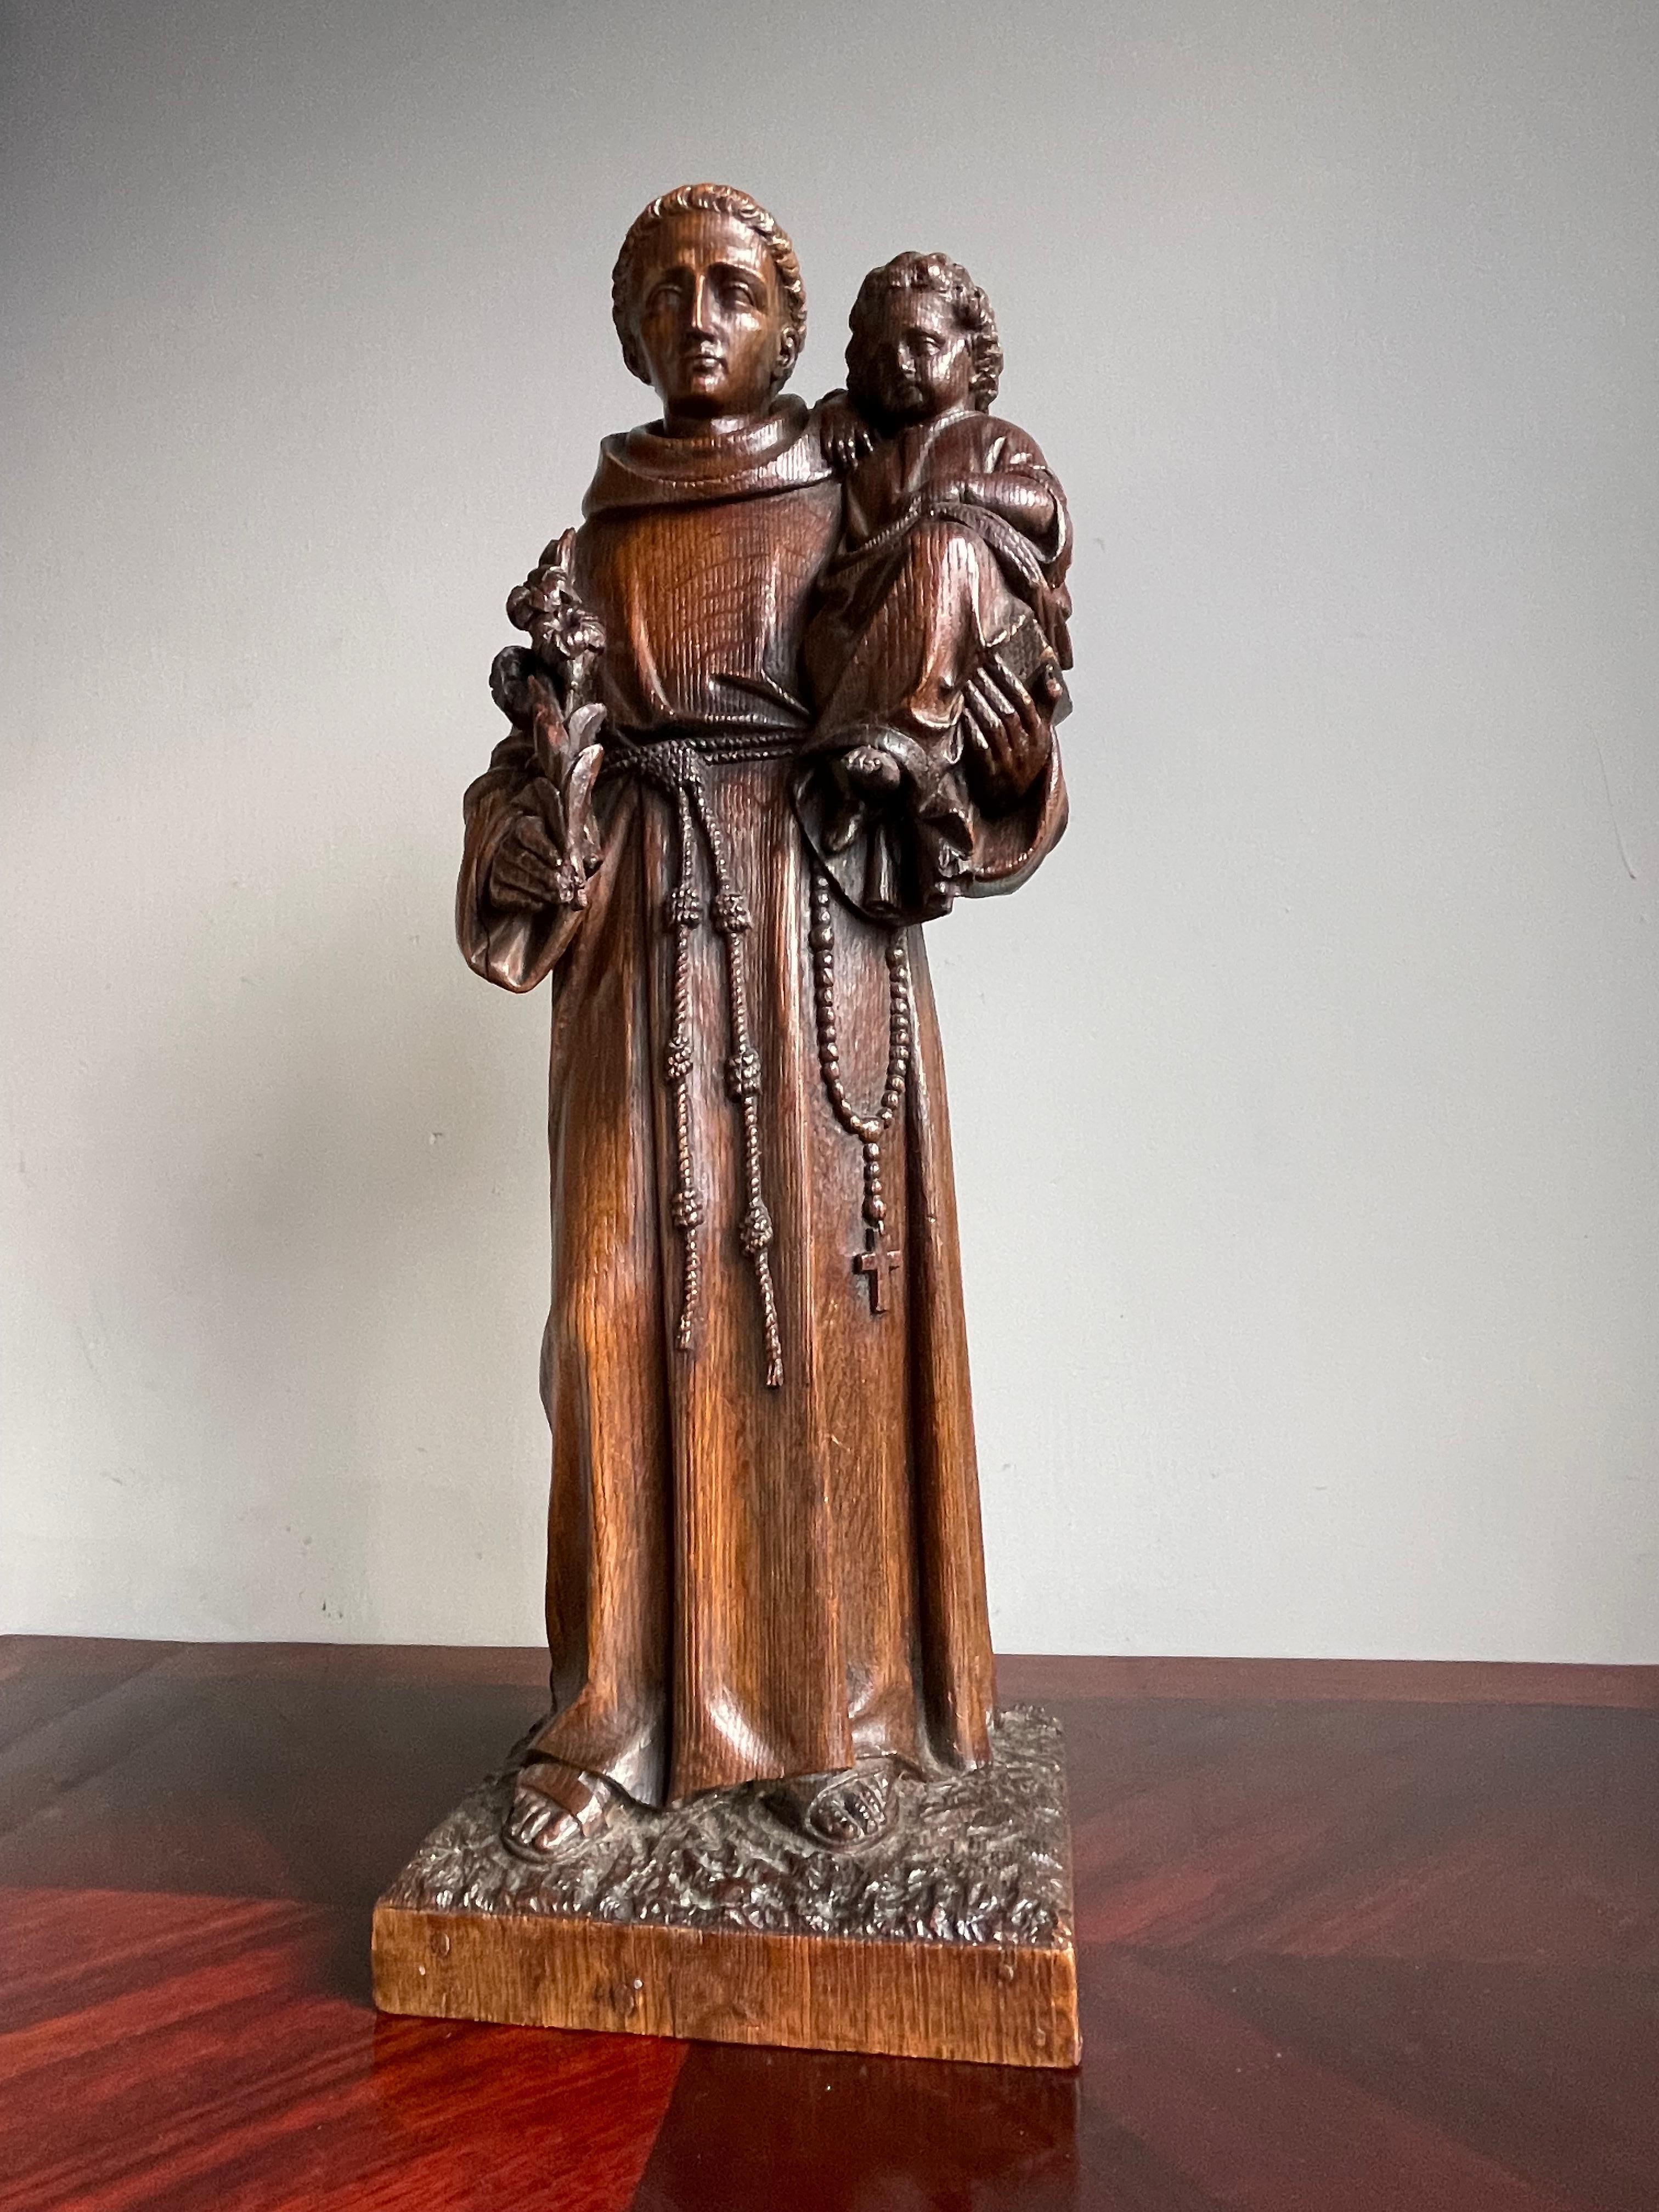 Top quality carved and good size Saint Anthony sculpture.

This beautiful quality sculpture of Saint Anthony is in very good condition. Saint Anthony is commonly shown holding the Child Jesus, who is often on a bible, with one or more madonna lilies